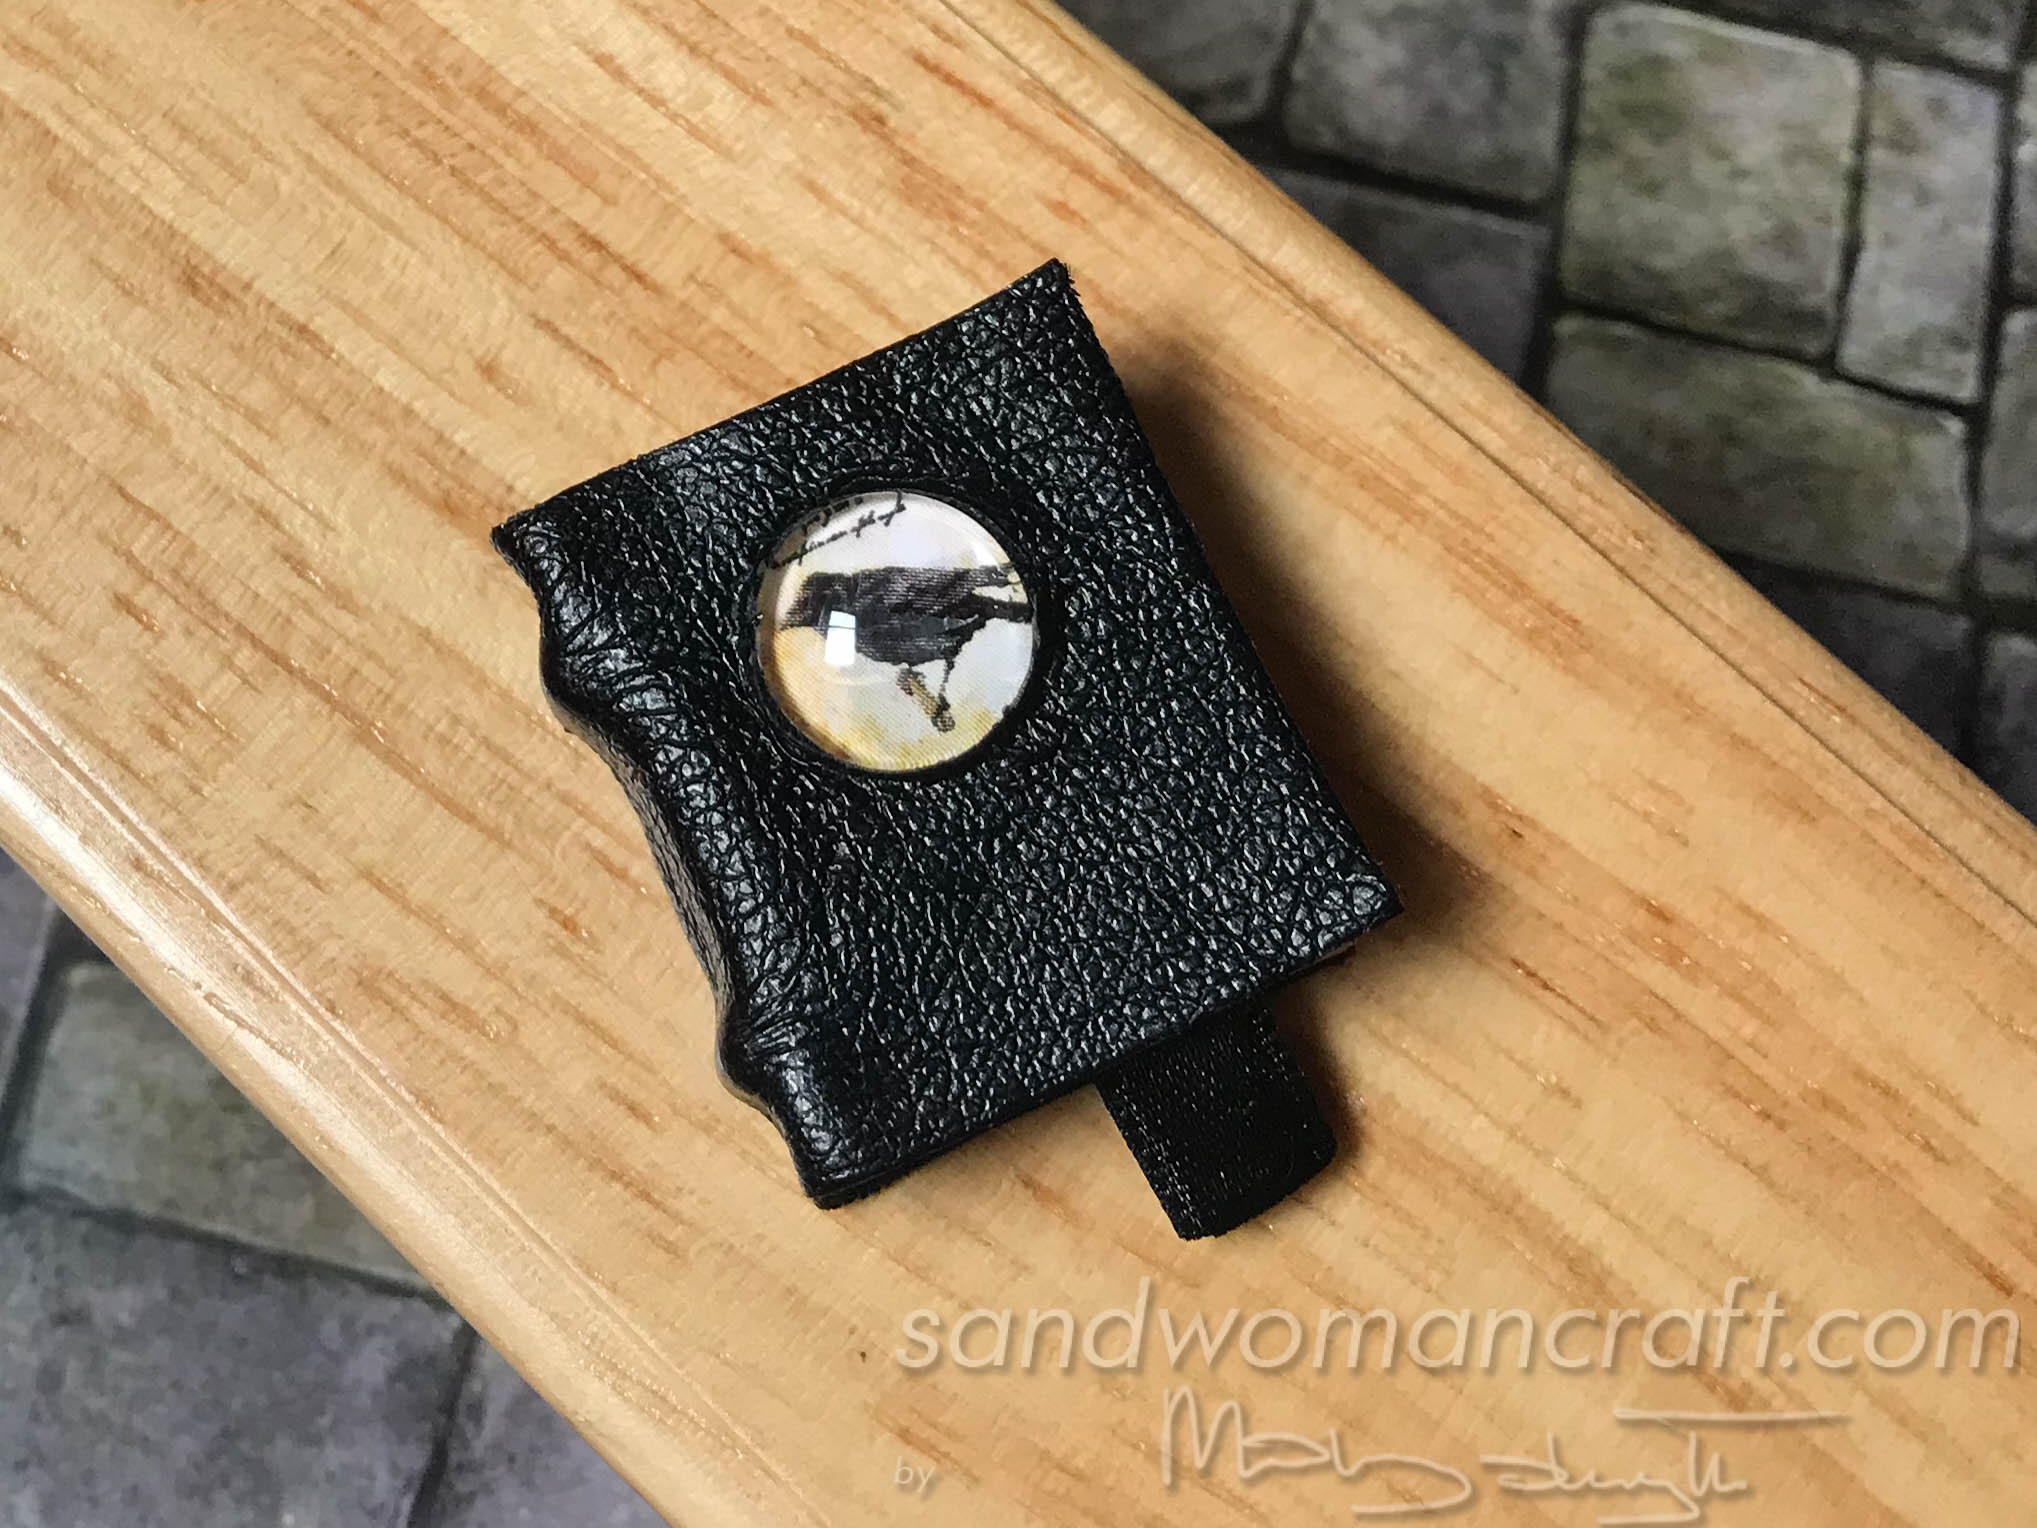 Miniature leather book with crow